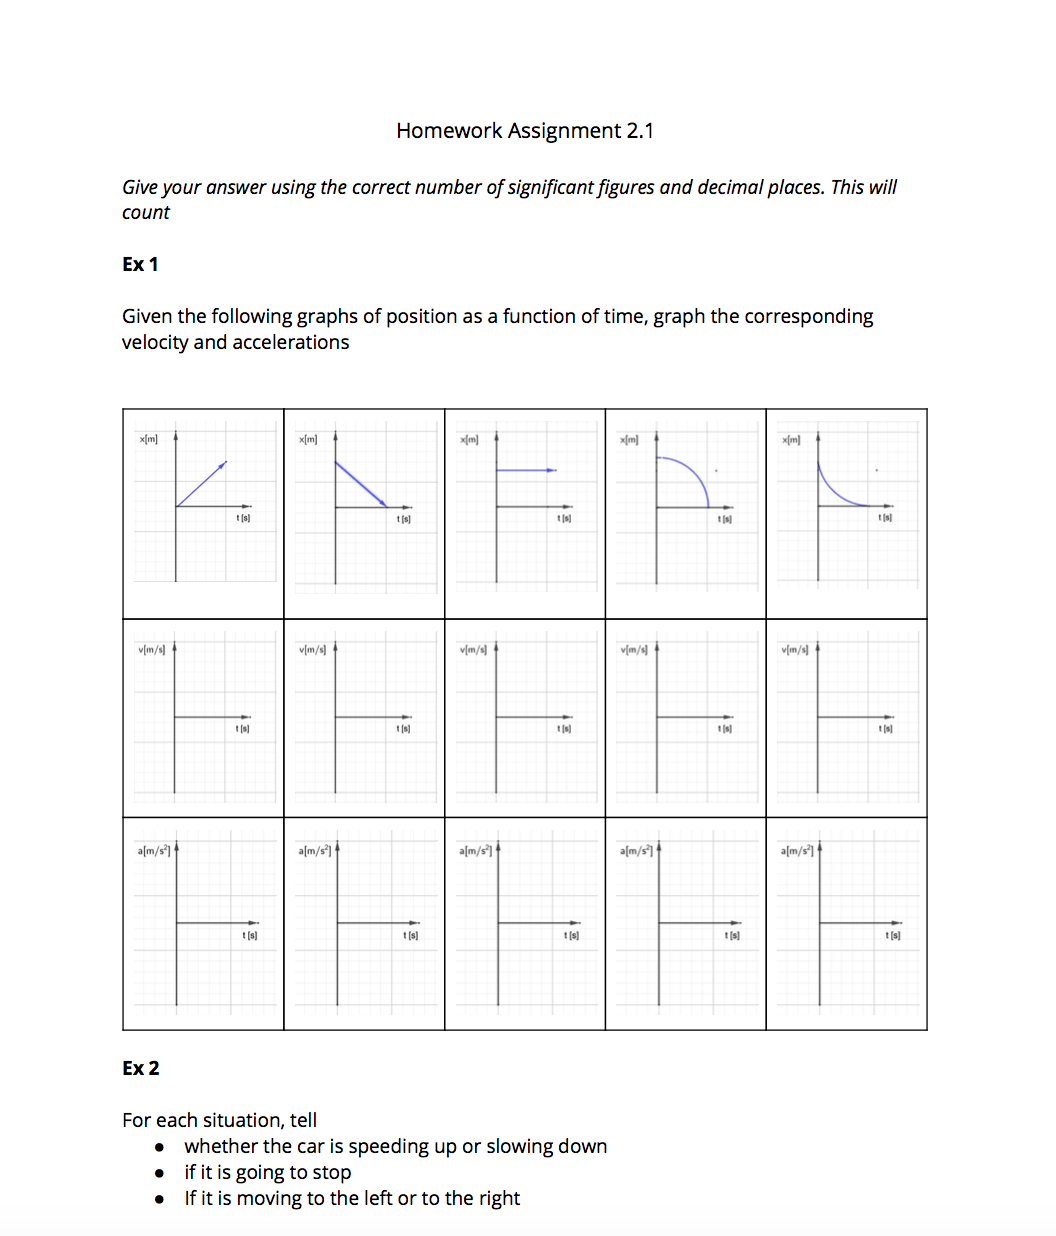 Homework Assignment 2.1
Give your answer using the correct number of significant figures and decimal places. This will
сount
Ex 1
Given the following graphs of position as a function of time, graph the corresponding
velocity and accelerations
x[m
xm)
x{m
xm
x[m
ts
ts
v{m/]
(m/]
vm/s
v{m/]
v{m/s]
ts
ts
t (s
alm/s
lm/s
lm/s1
am/s
alm/s
s
t s
s
ts
t(s
Ex 2
For each situation, tell
whether the car is speeding up or slowing down
if it is going to stop
If it is moving to the left or to the right
